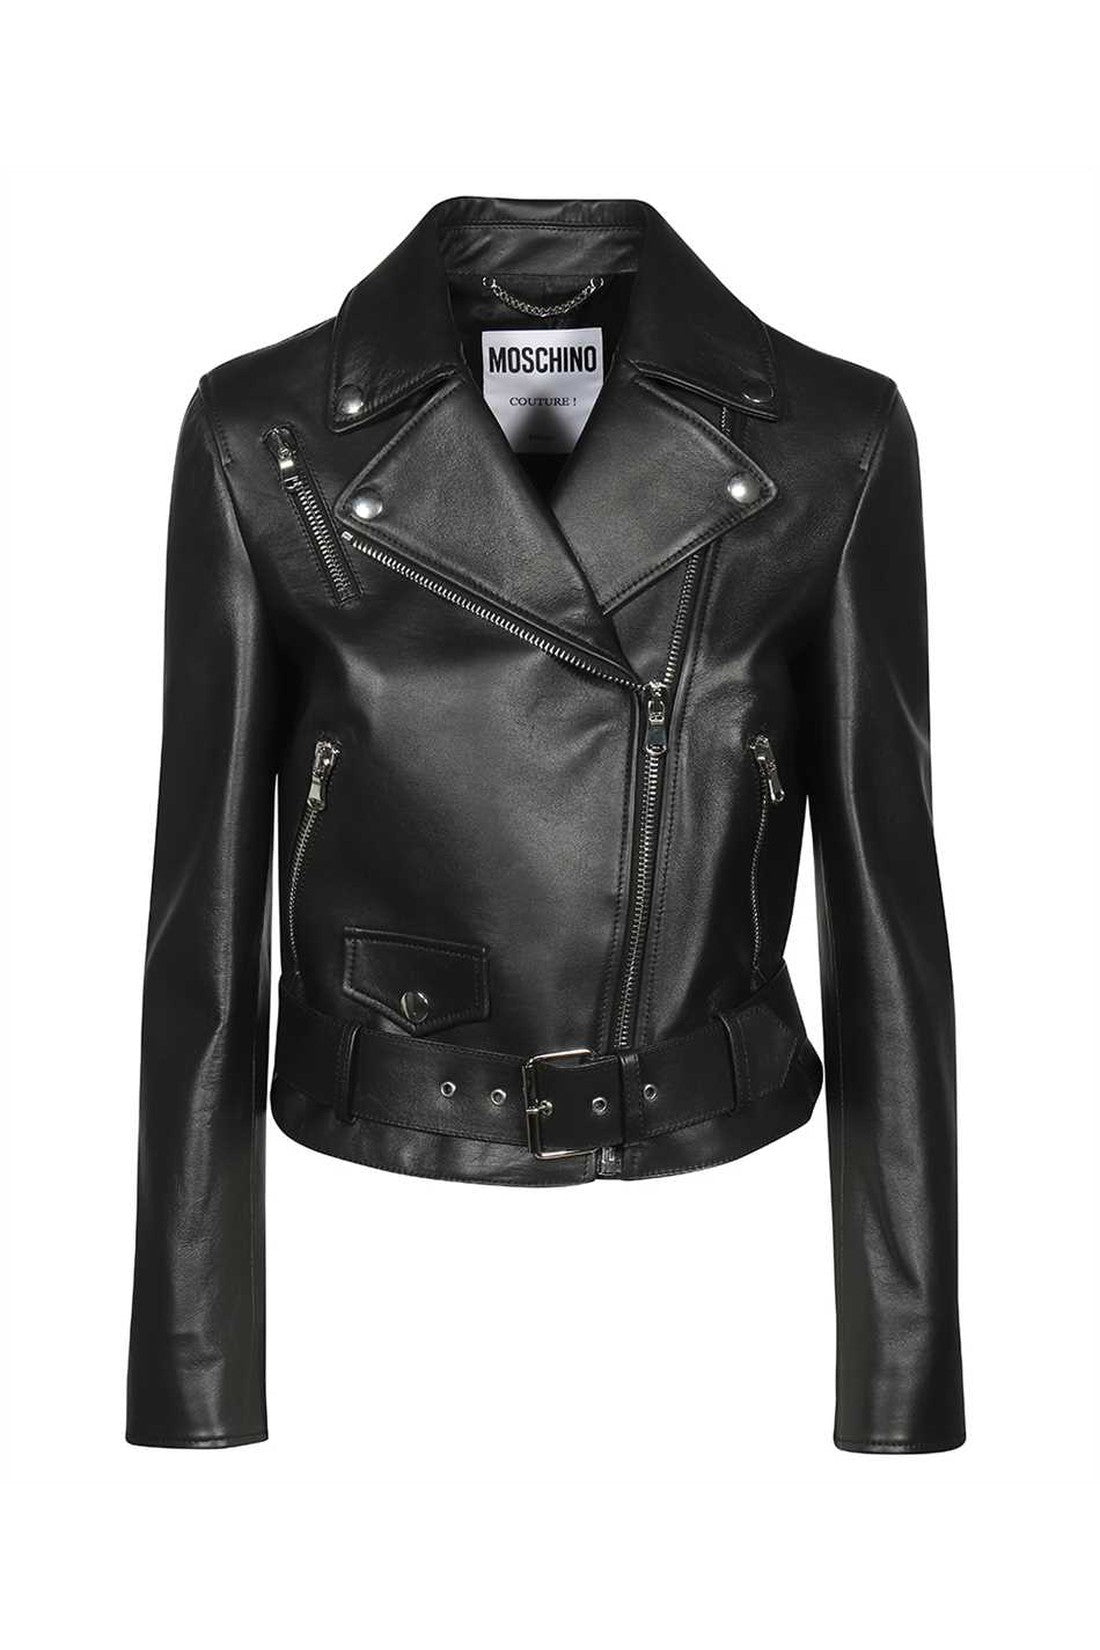 Leather jacket-Moschino-OUTLET-SALE-40-ARCHIVIST